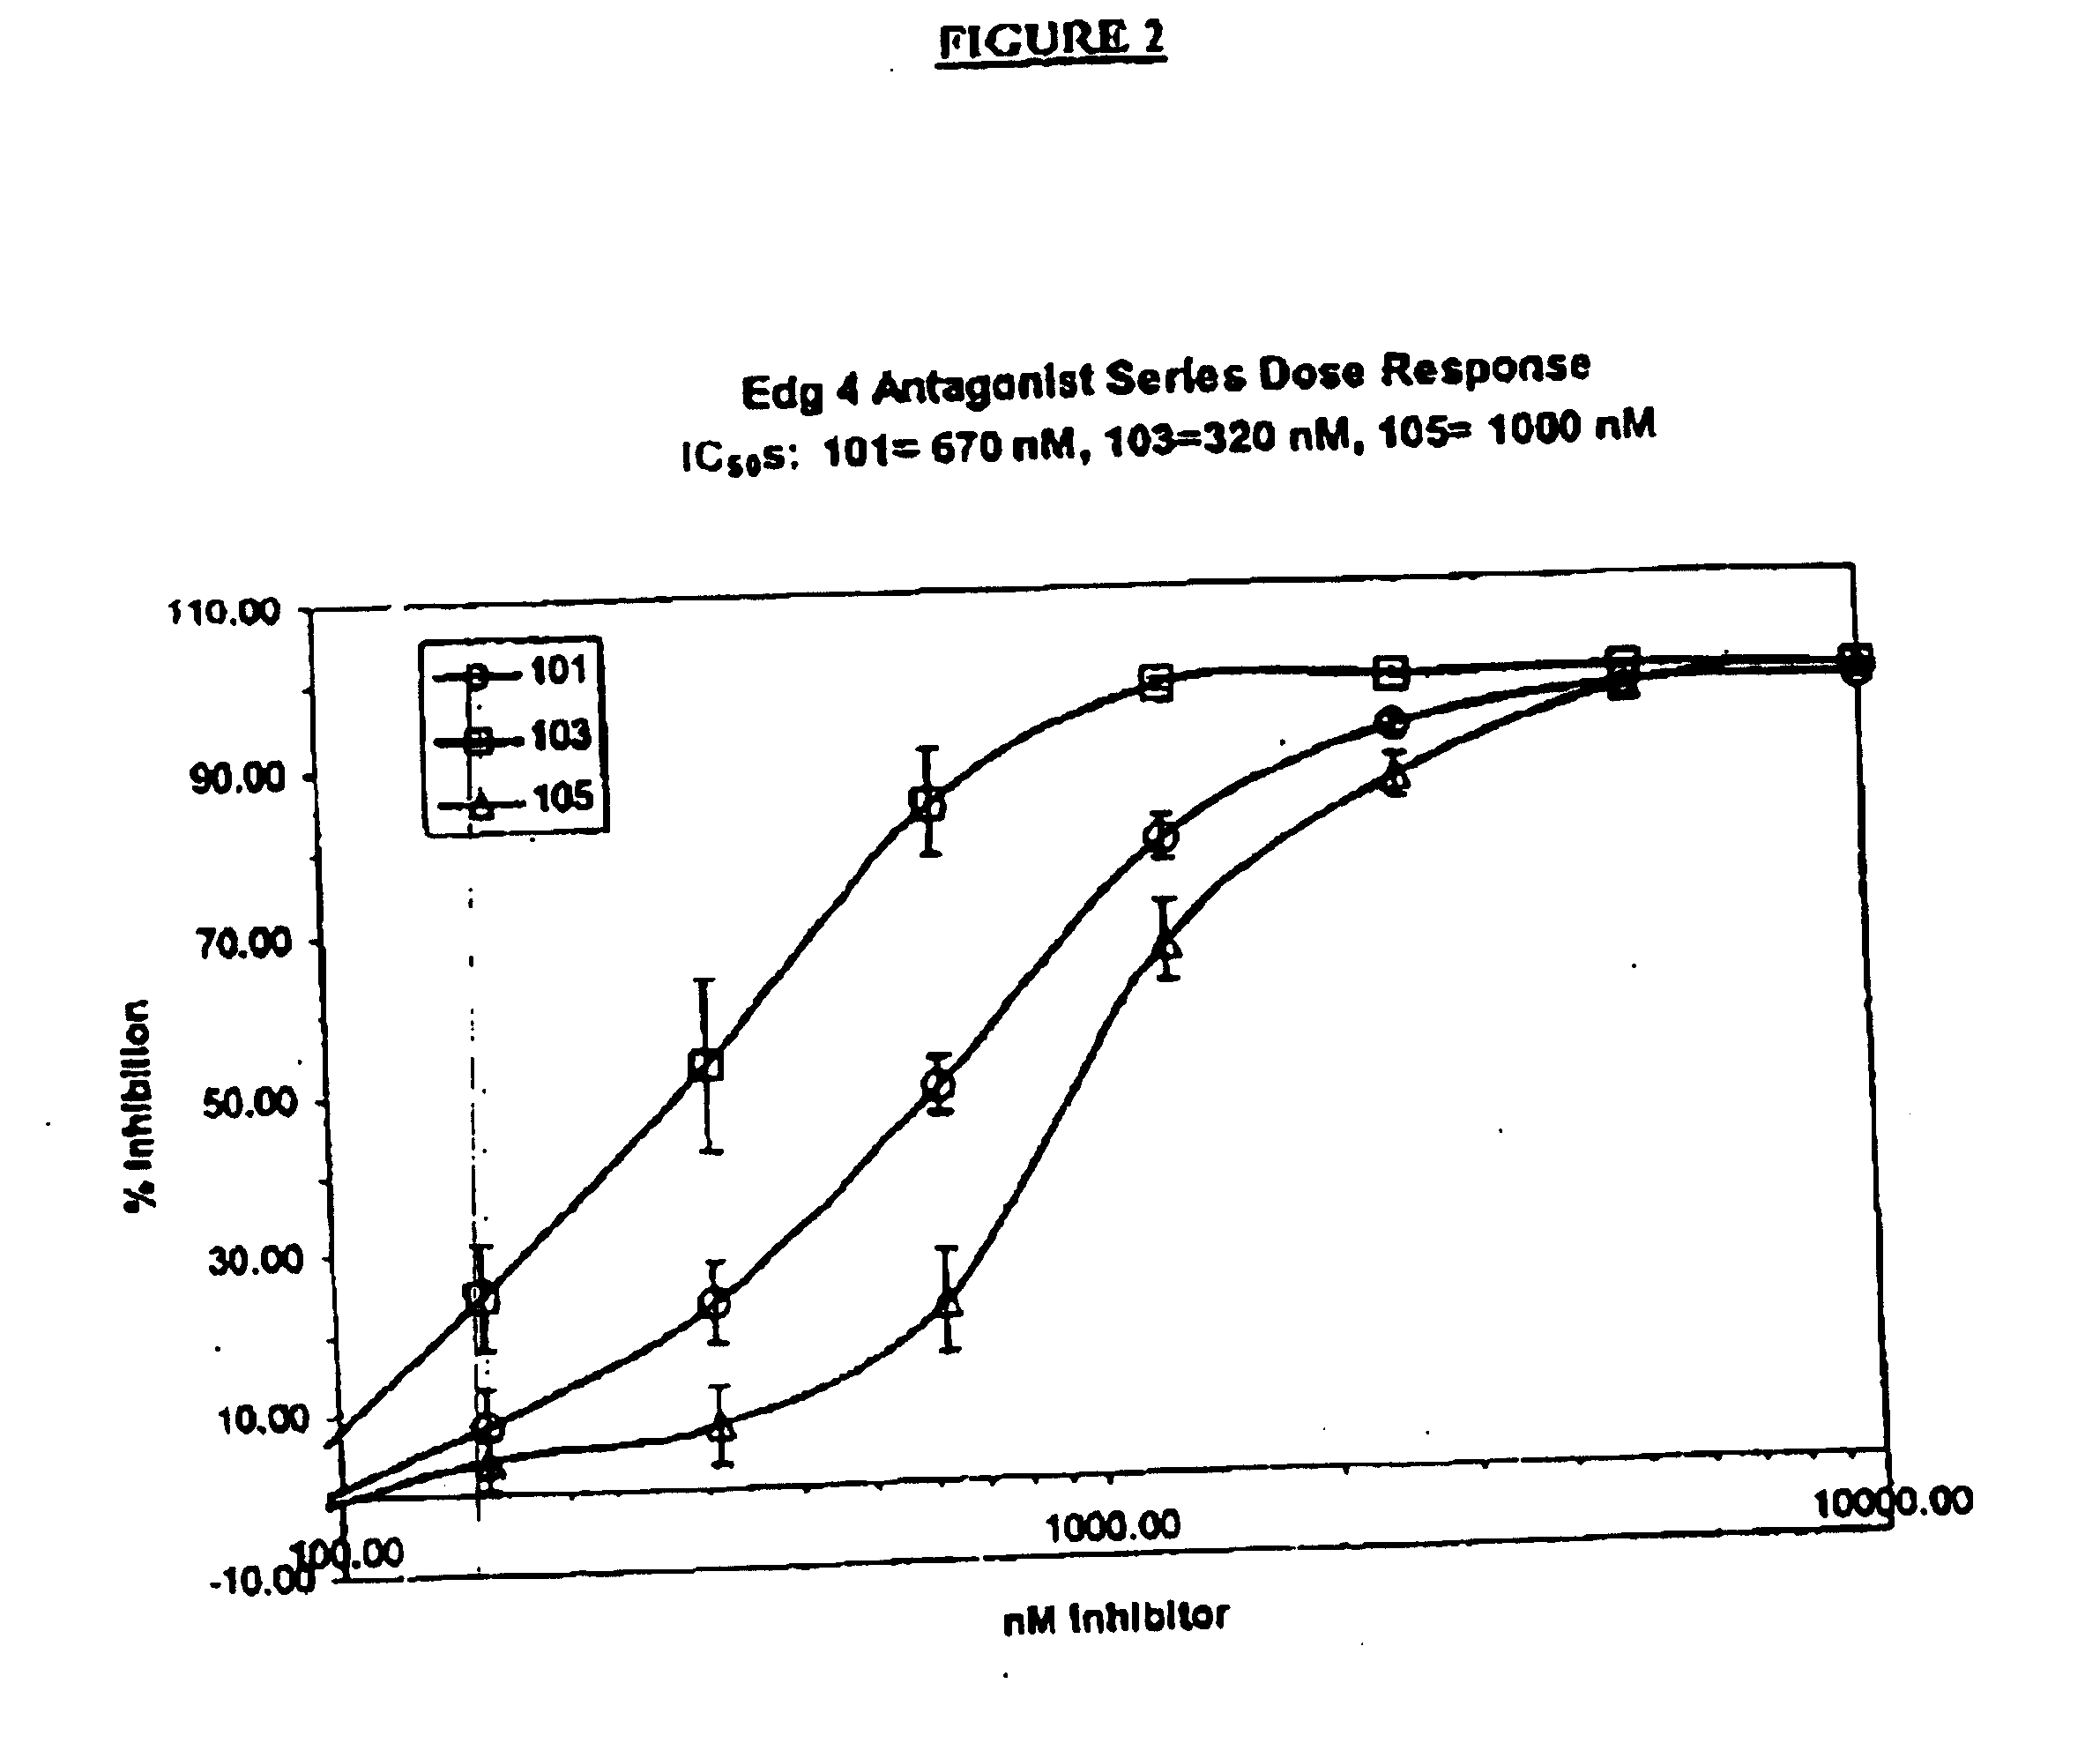 Methods of treating conditions associated with an EDG-4 receptor